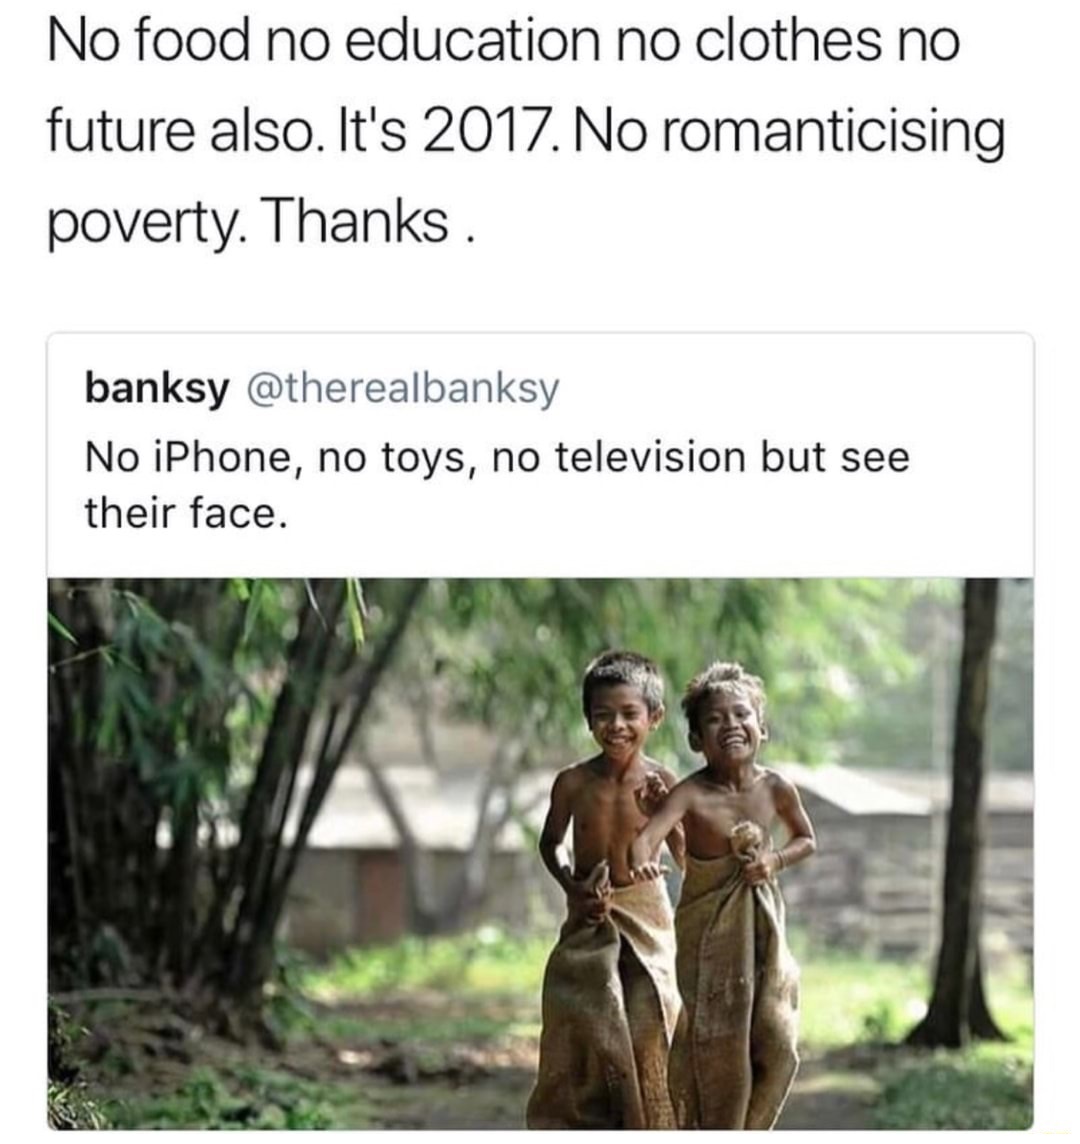 children playing india - No food no education no clothes no future also. It's 2017. No romanticising poverty. Thanks. banksy No iPhone, no toys, no television but see their face.